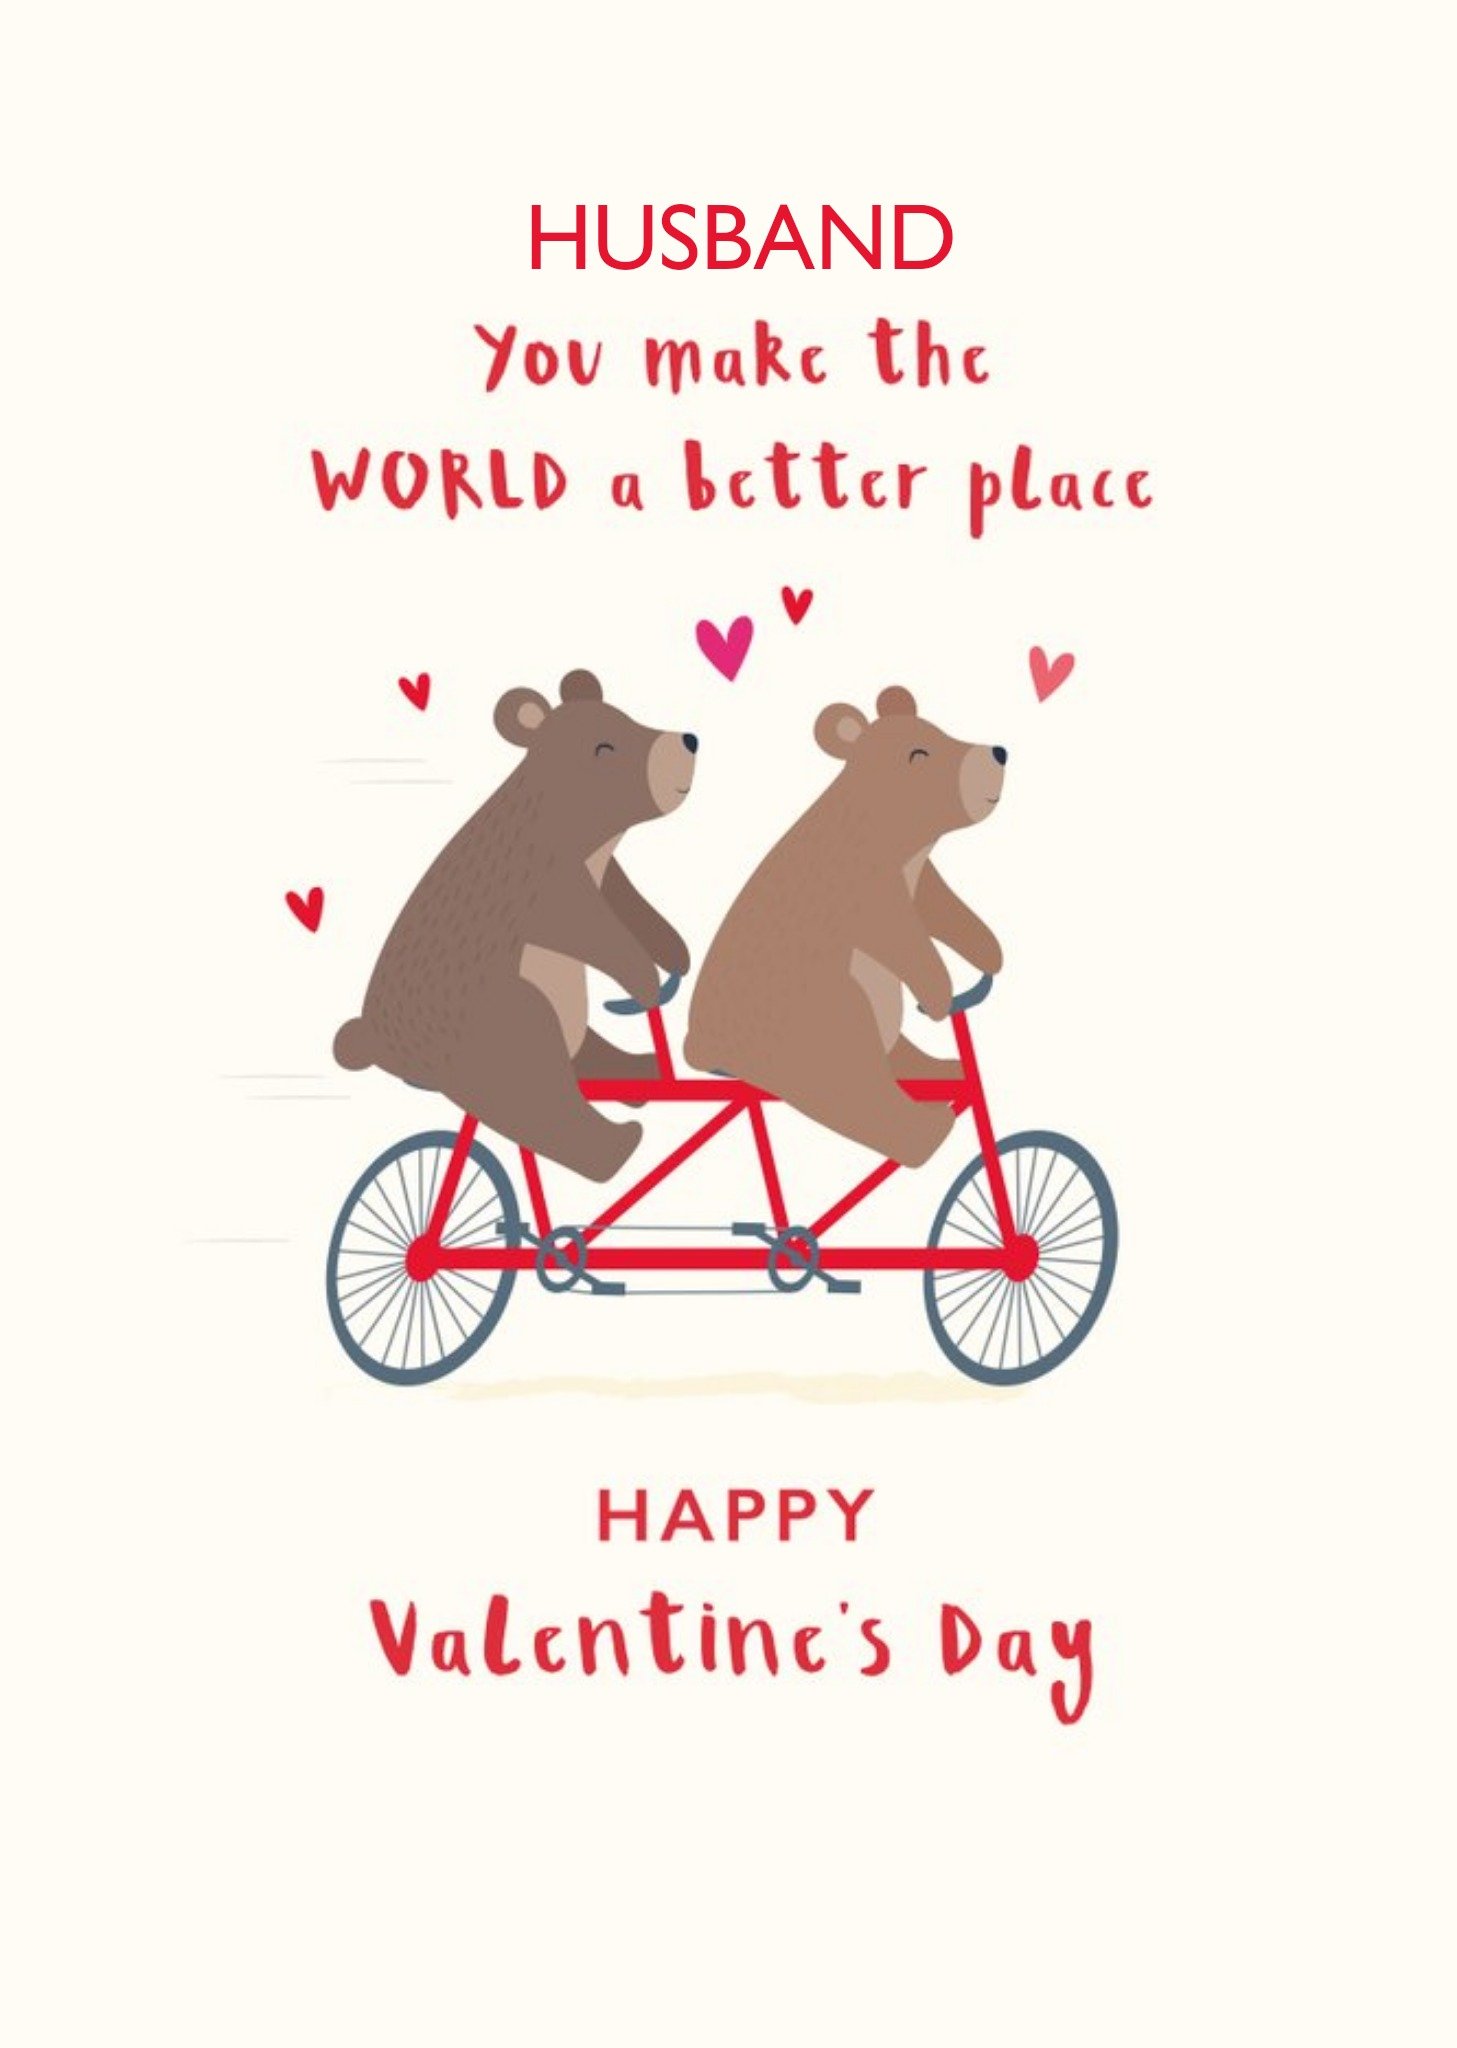 Moonpig Cute Illustration Of A Pair Of Bears Riding A Tandem Bike Valentine's Day Card Ecard